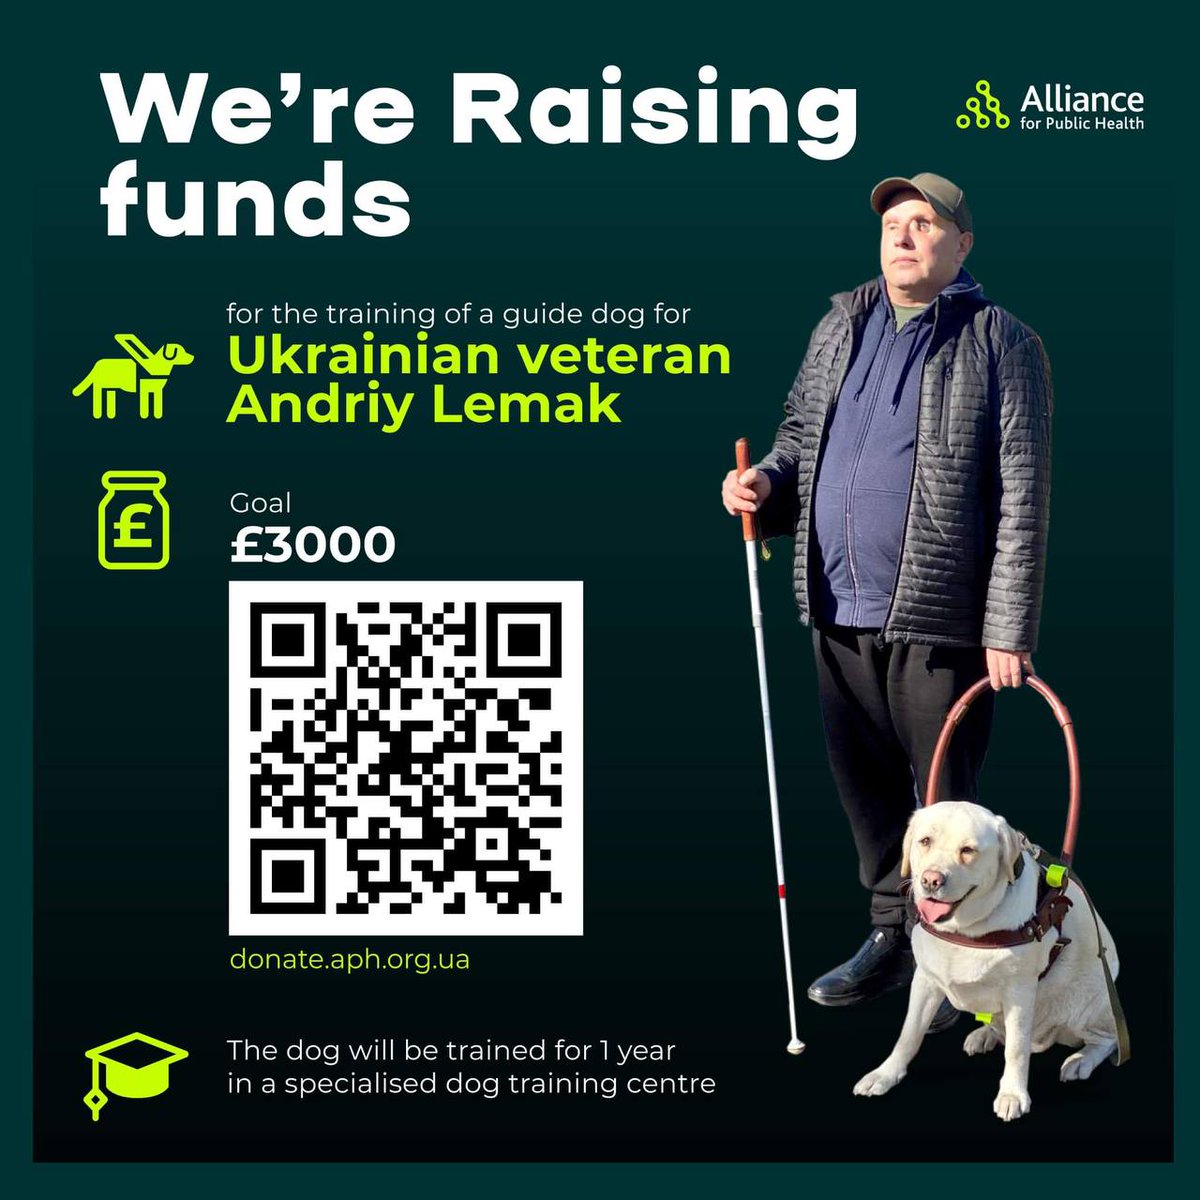 WE ARE RAISING 3,000 pounds to restore the life of Ukrainian veteran Andriy Lemak. He needs a guide dog, whose training programme will last for 1 year at a specialised dog training centre! Make a donation: donate.aph.org.ua/en